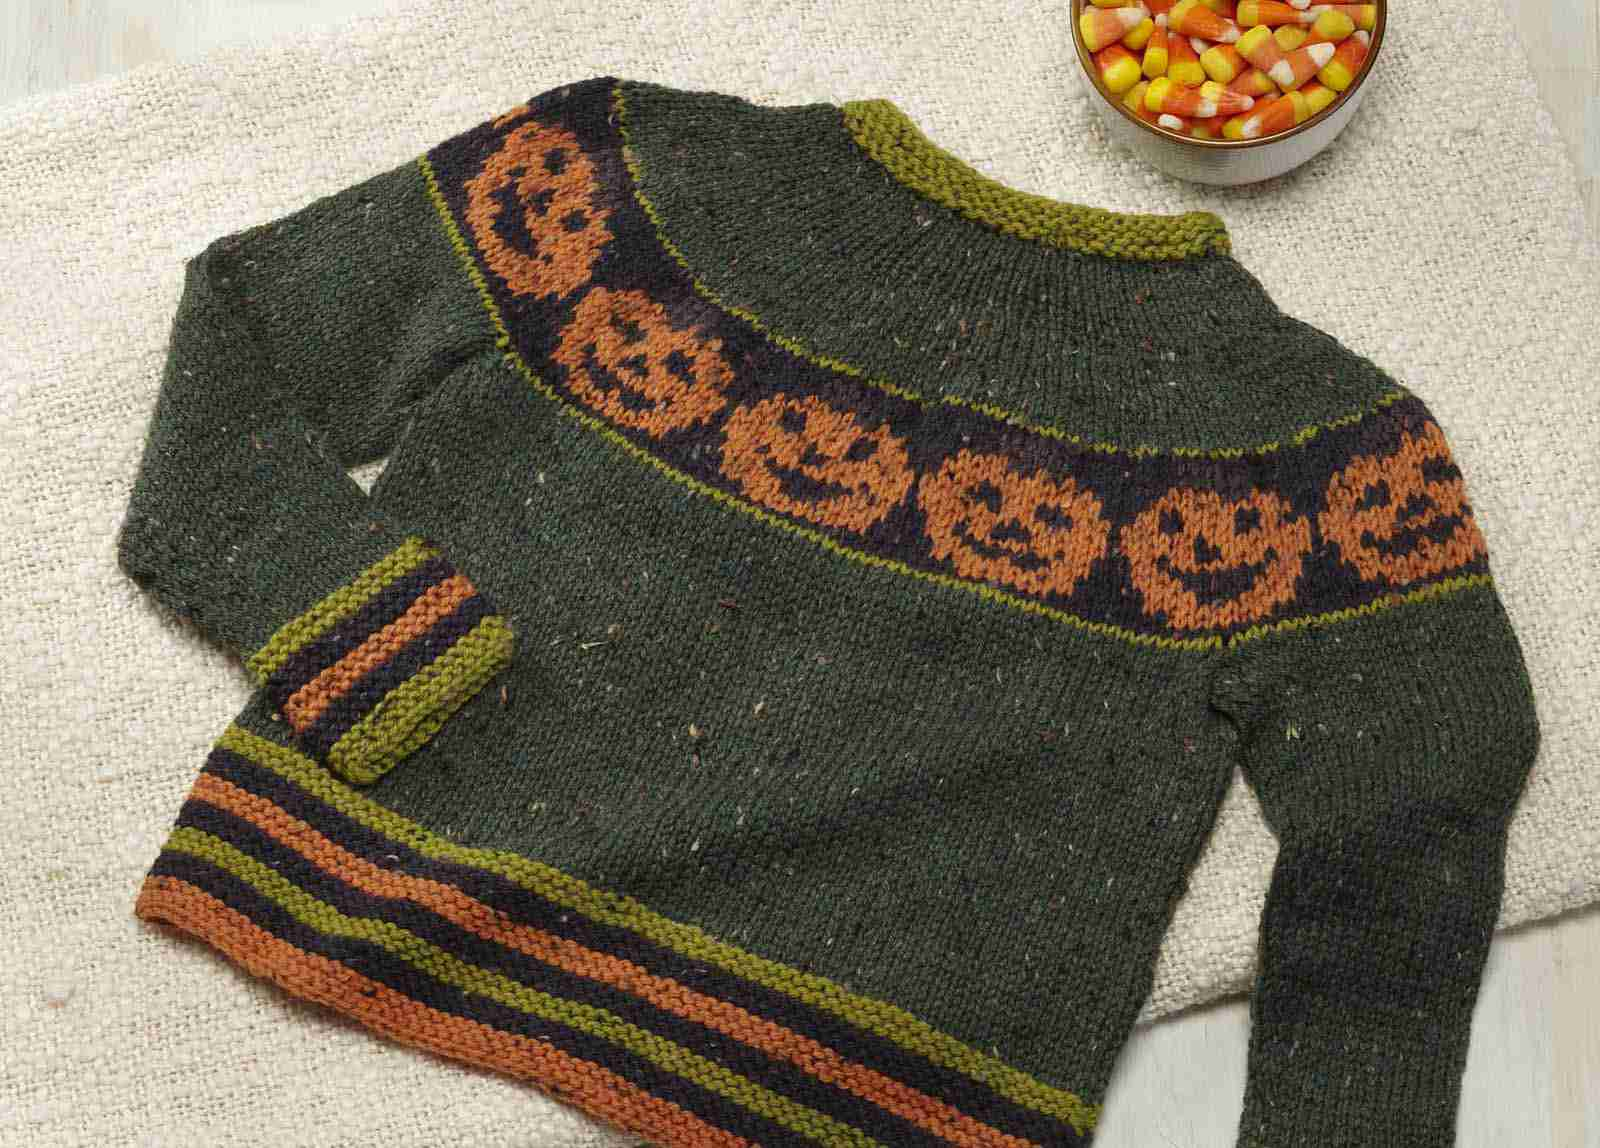 Knitted Childrens Sweaters Free Patterns 10 Free Pumpkin Patterns For Knitting